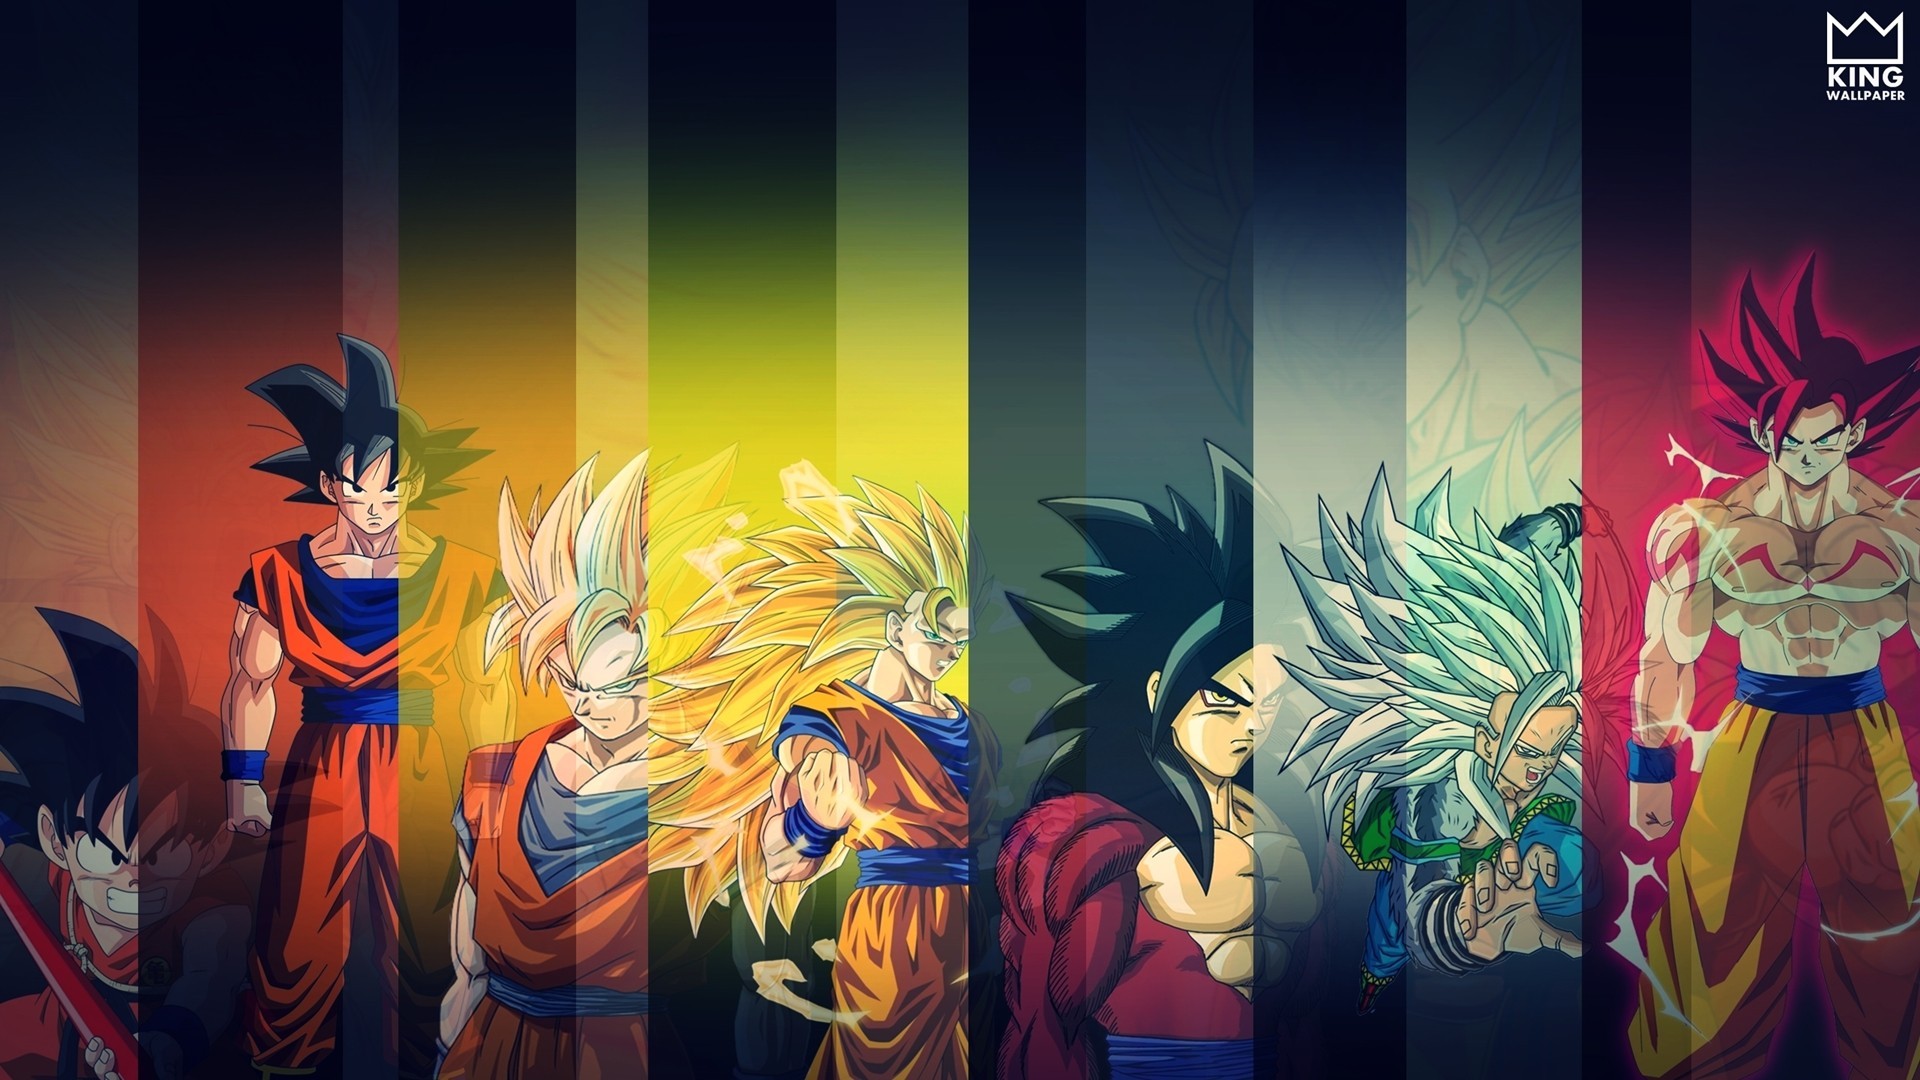 Goku Desktop Wallpaper with resolution 1920X1080 pixel. You can use this wallpaper as background for your desktop Computer Screensavers, Android or iPhone smartphones